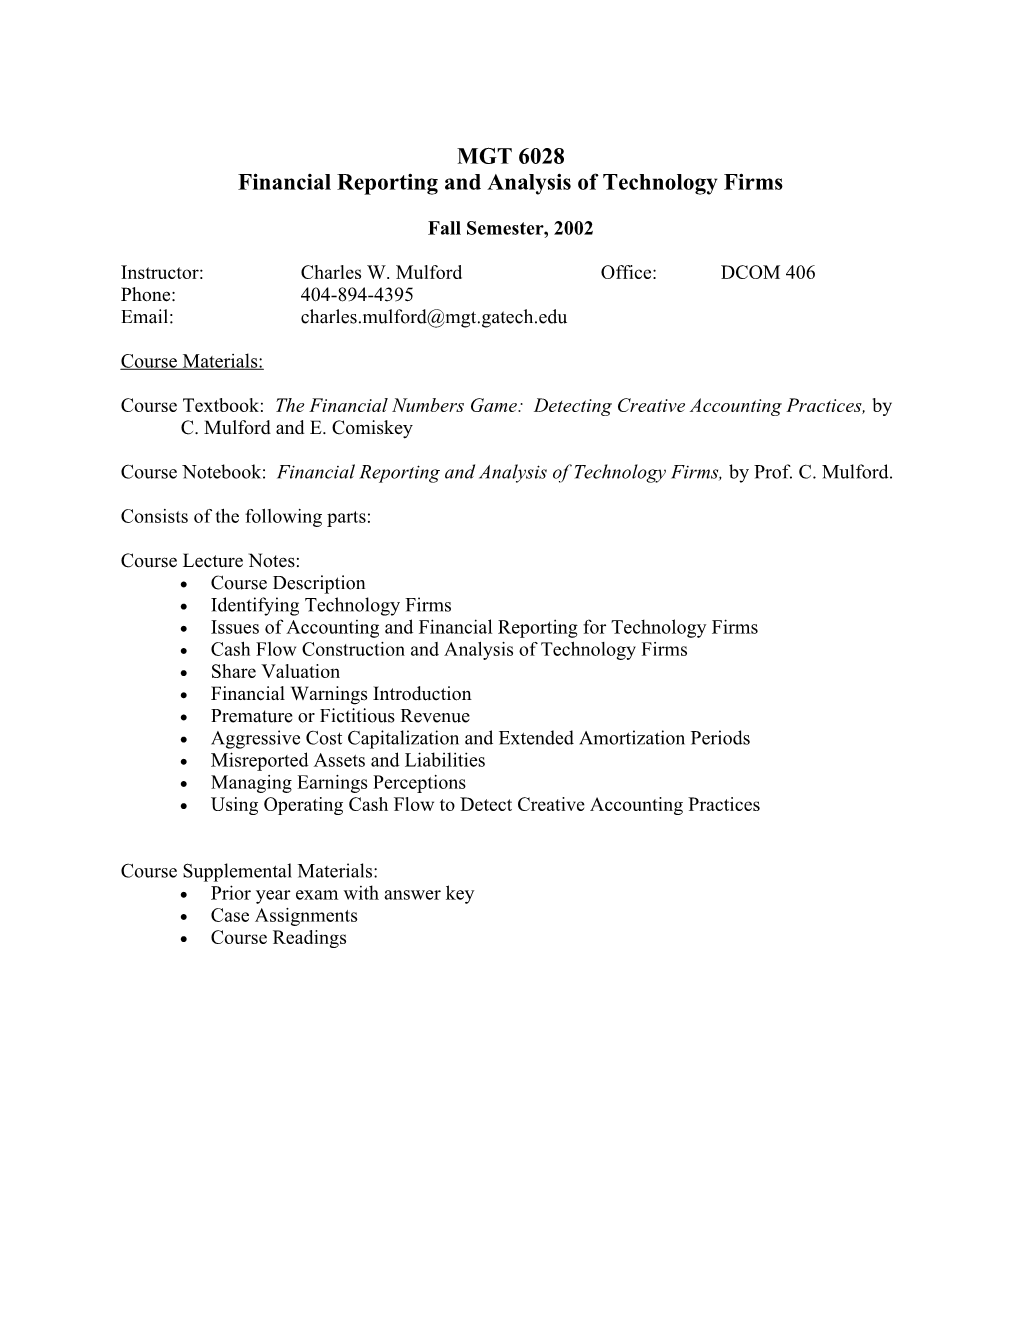 Financial Reporting and Analysis of Technology Firms